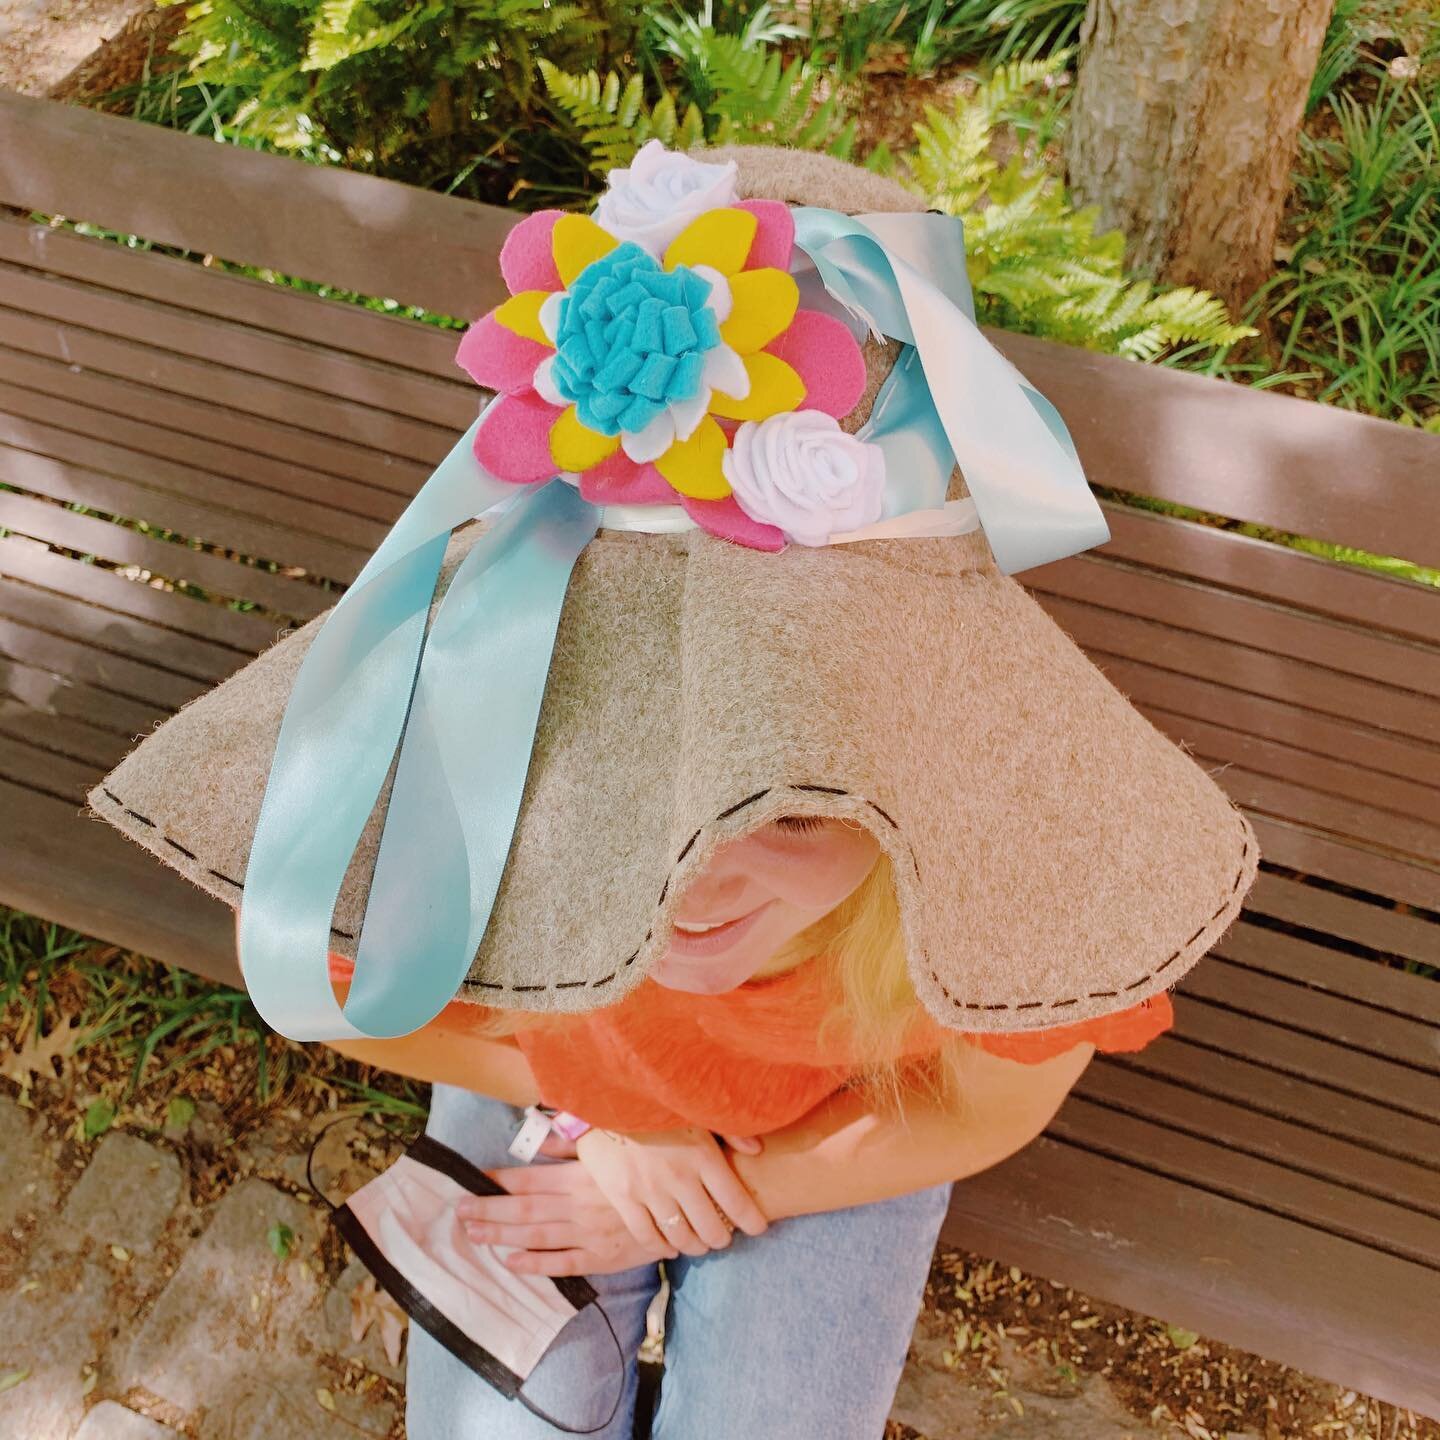 Final studio project was a felt hat!! I was inspired by floppy sun hats and the exaggerated decoration of derby hats! I had so much fun making it, but am so ready for a break from long nights in the studio 🥰🥰🥰 #industrialdesign #id